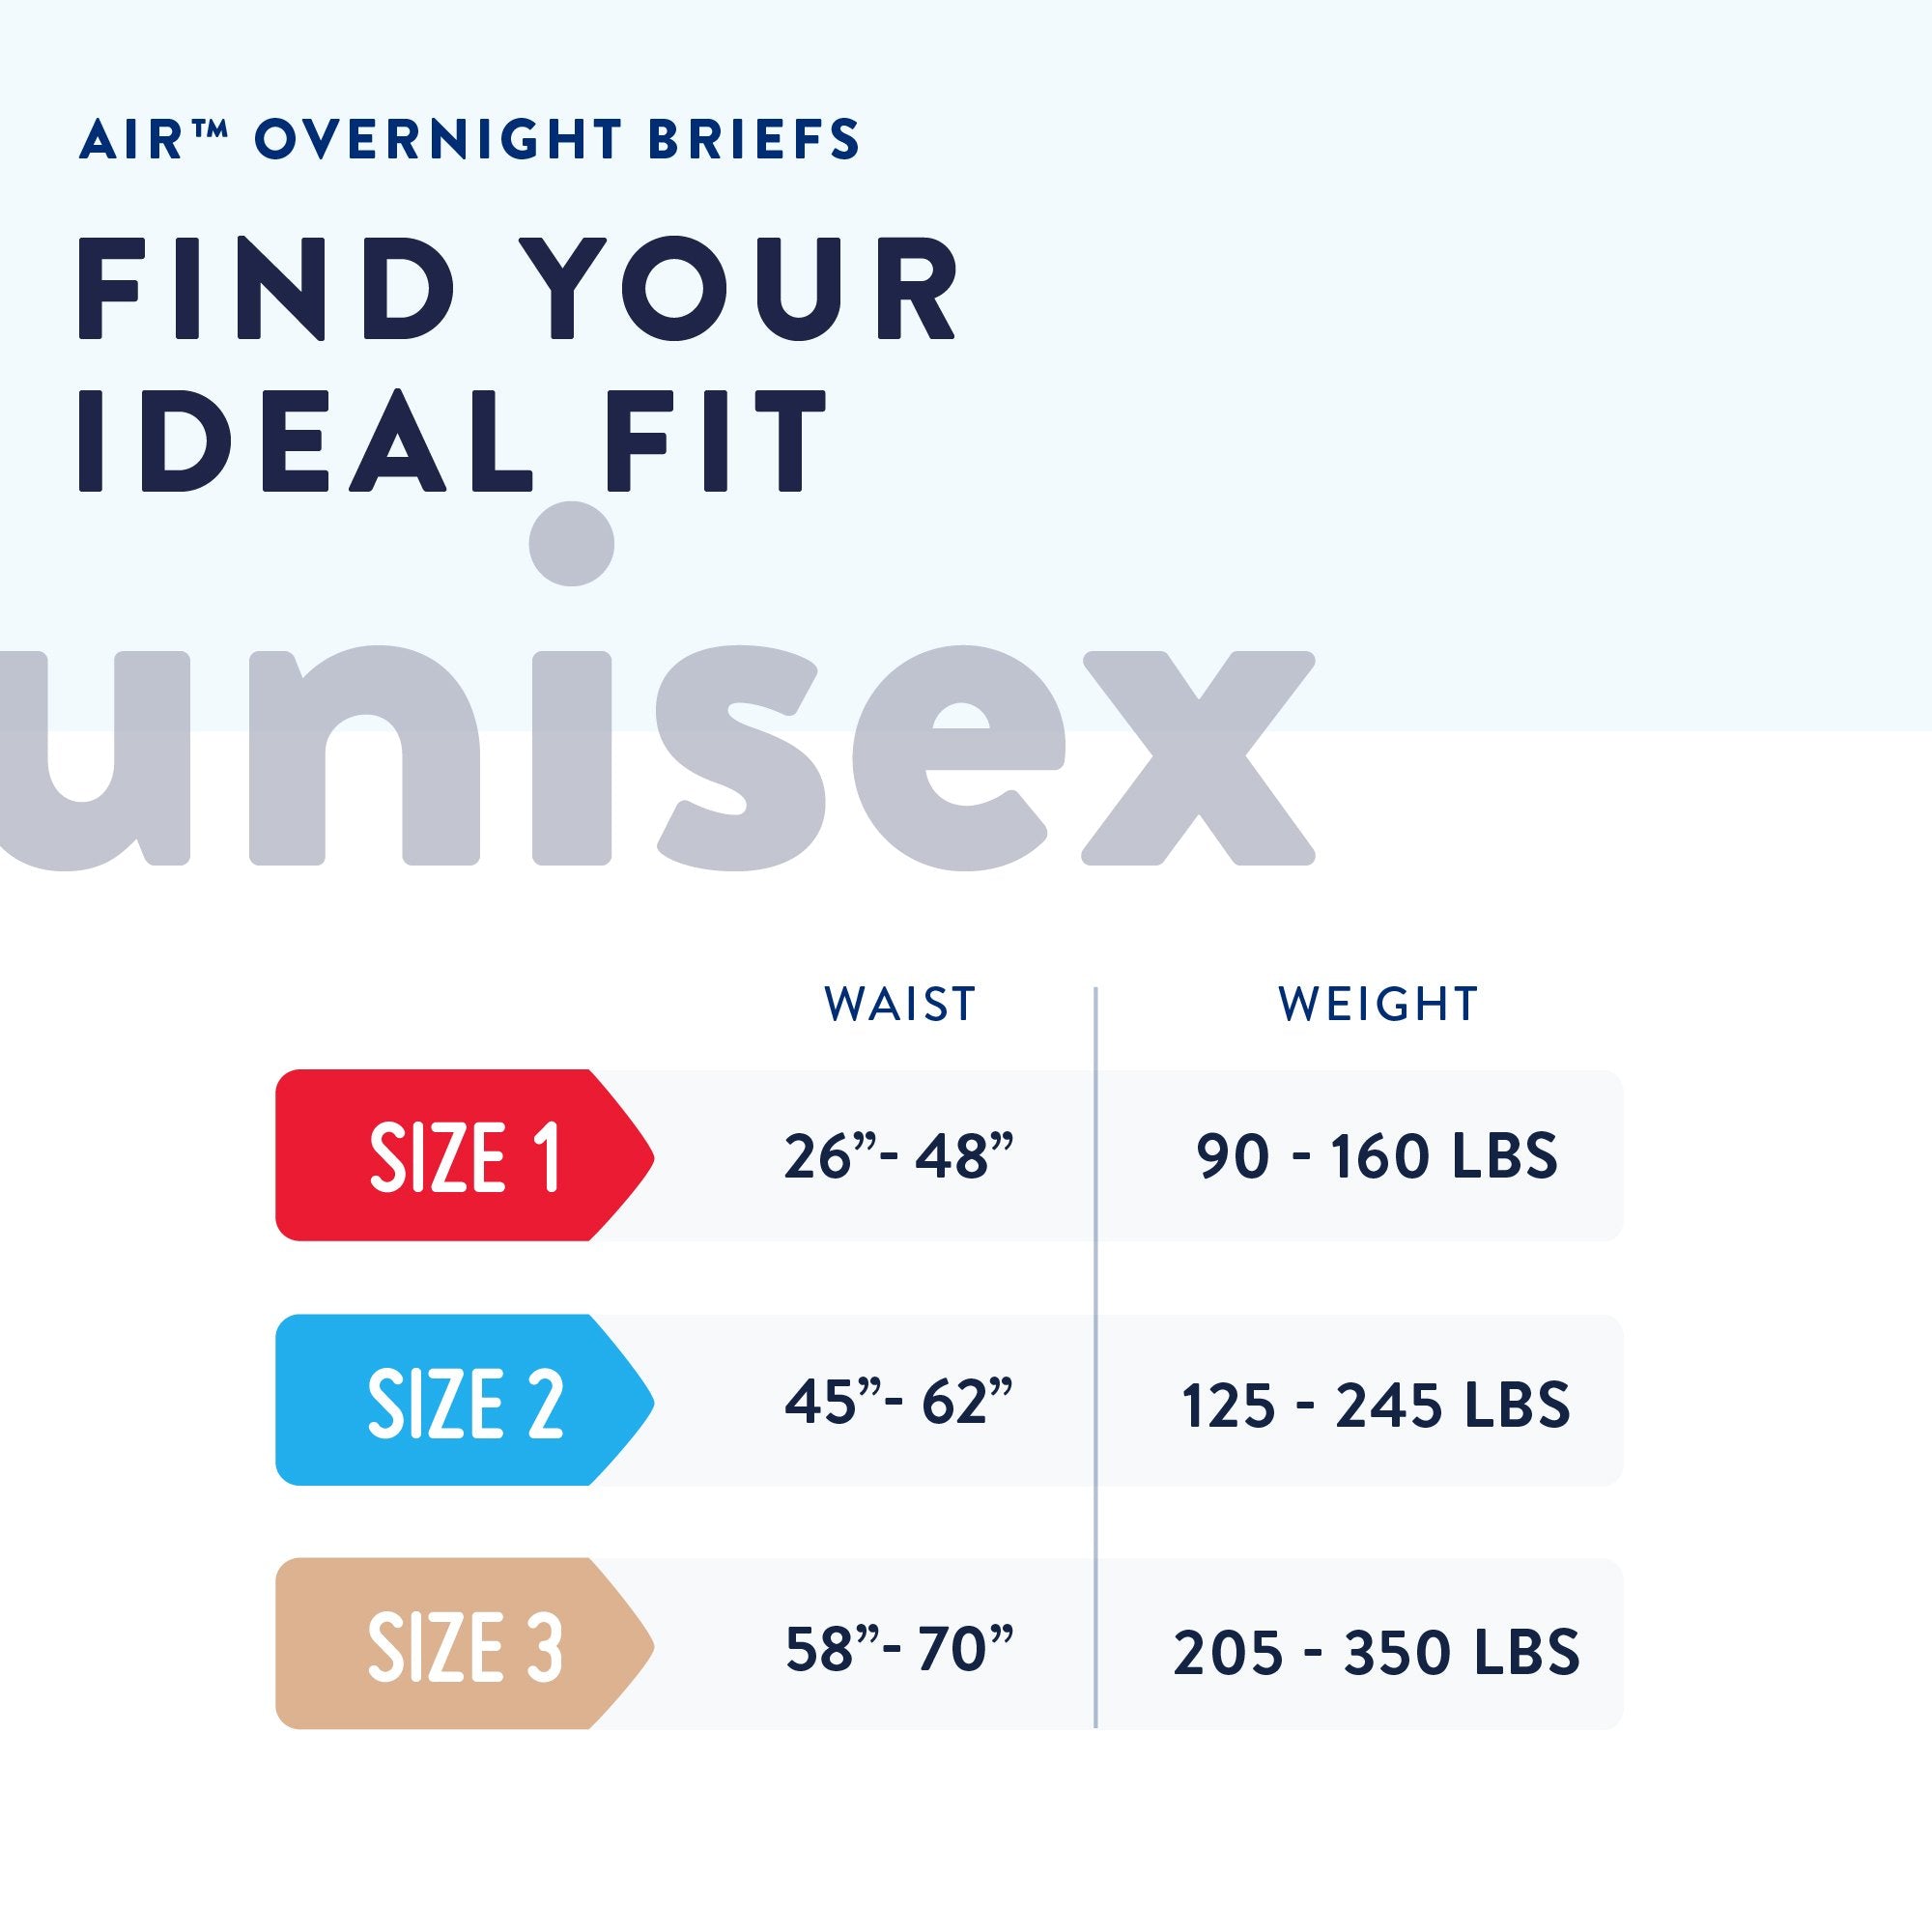 Unisex Adult Incontinence Brief Prevail Air™ Overnight Size 2 Disposable Heavy Absorbency